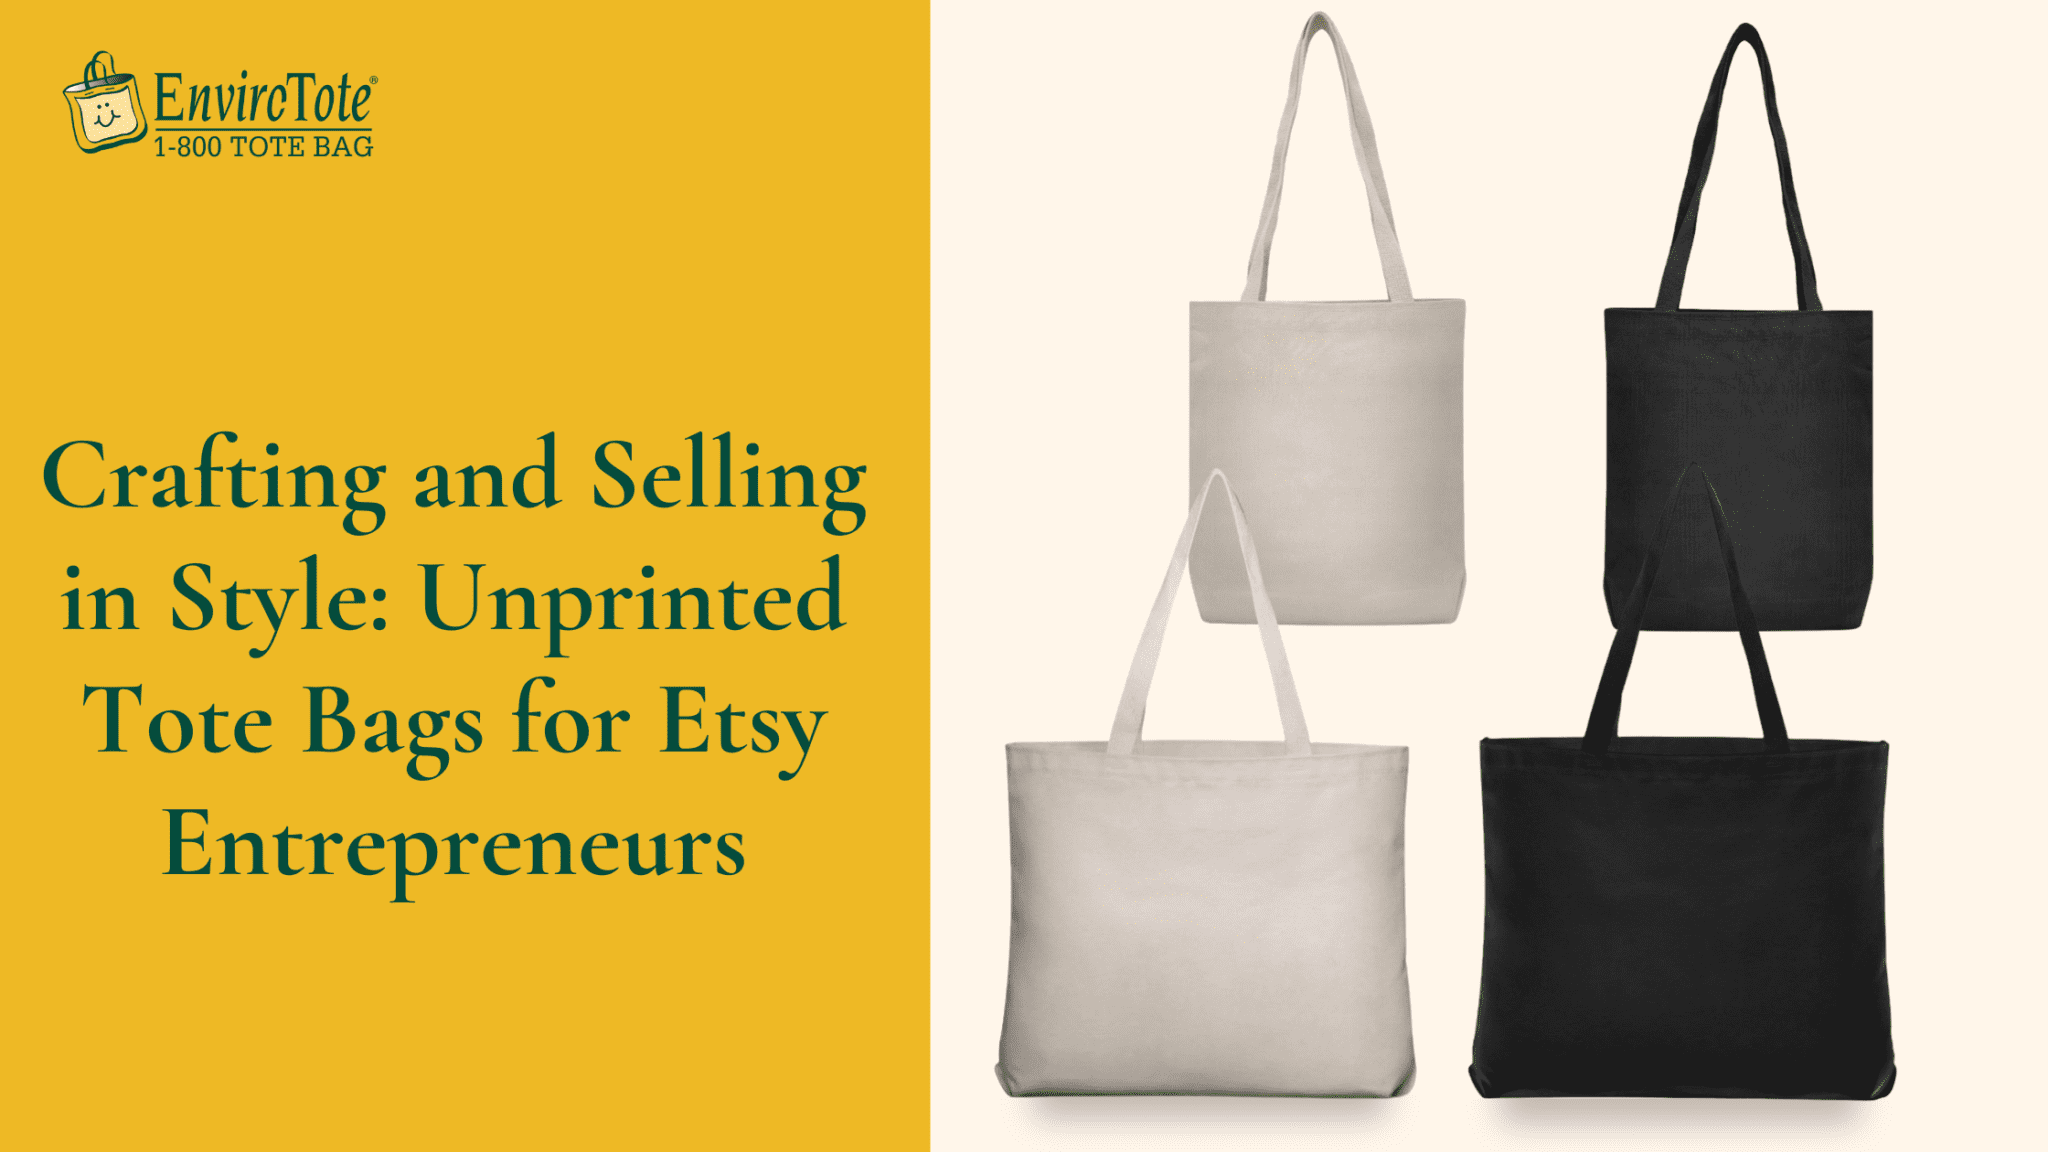 Blog | Tote Bag Ideas and Inspiration from Enviro-Tote